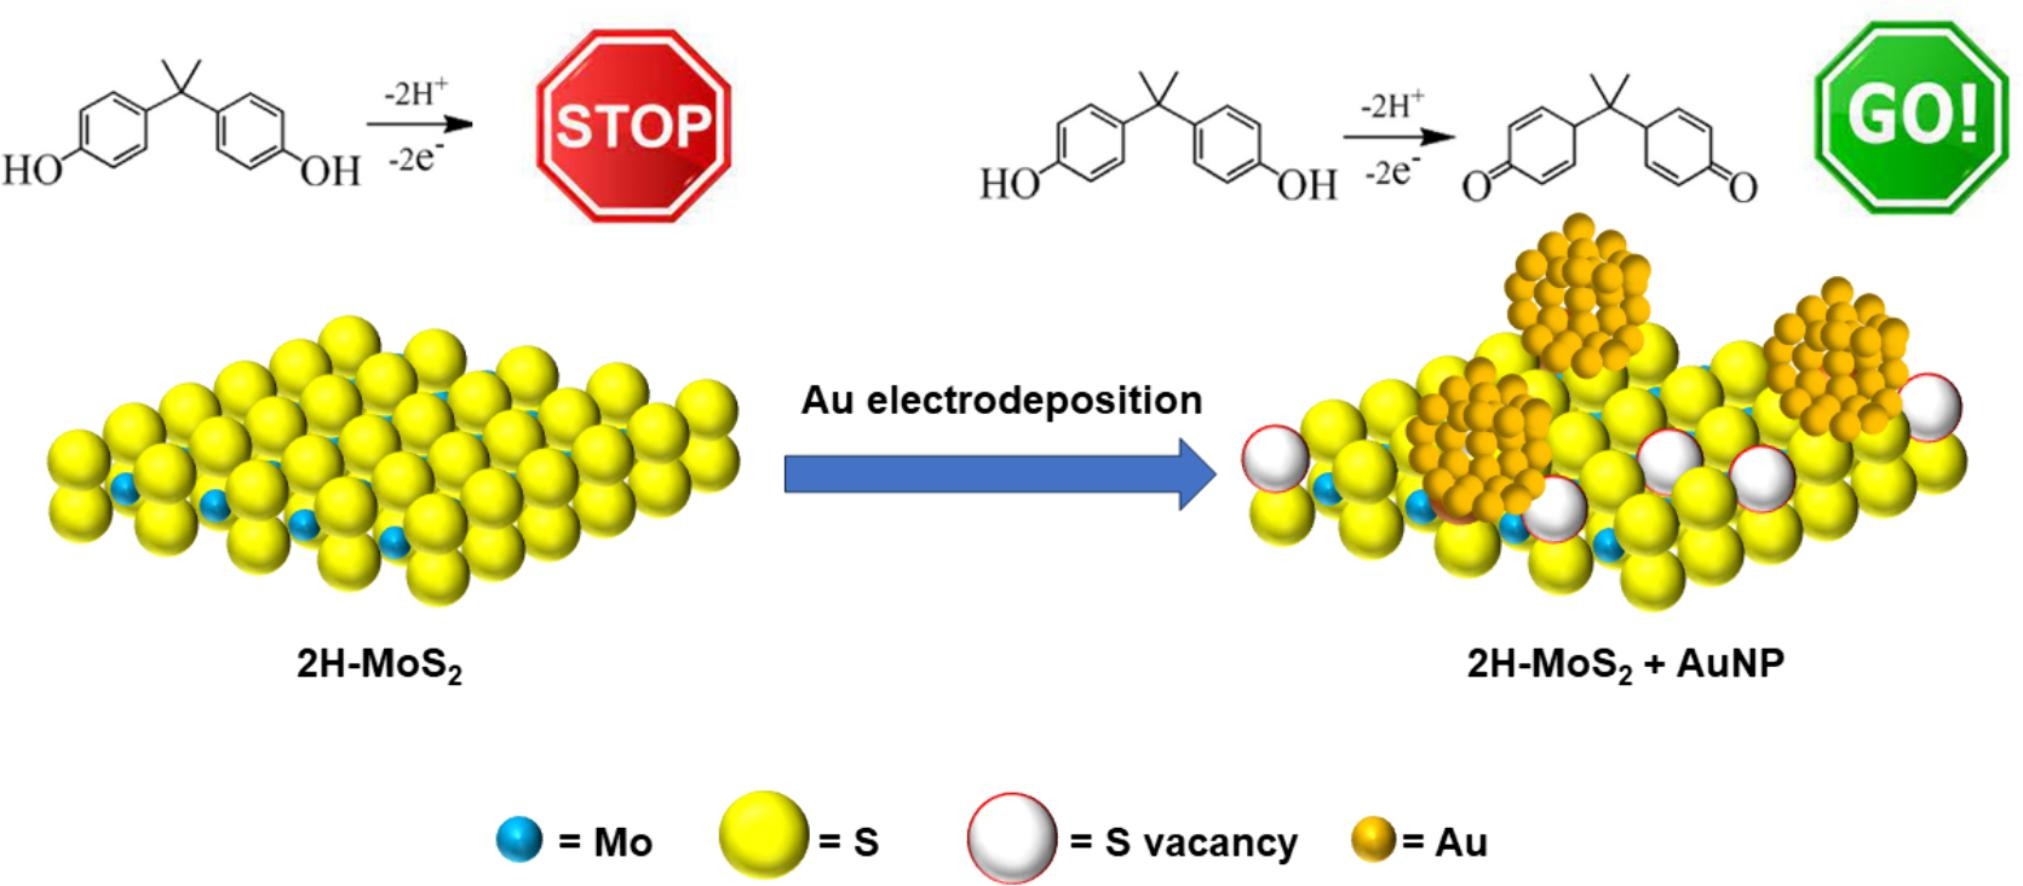 Electrodeposition of Au nanoparticles on ITO/PDAC/2H-MoS2 electrode for sensitive determination of bisphenol-A.